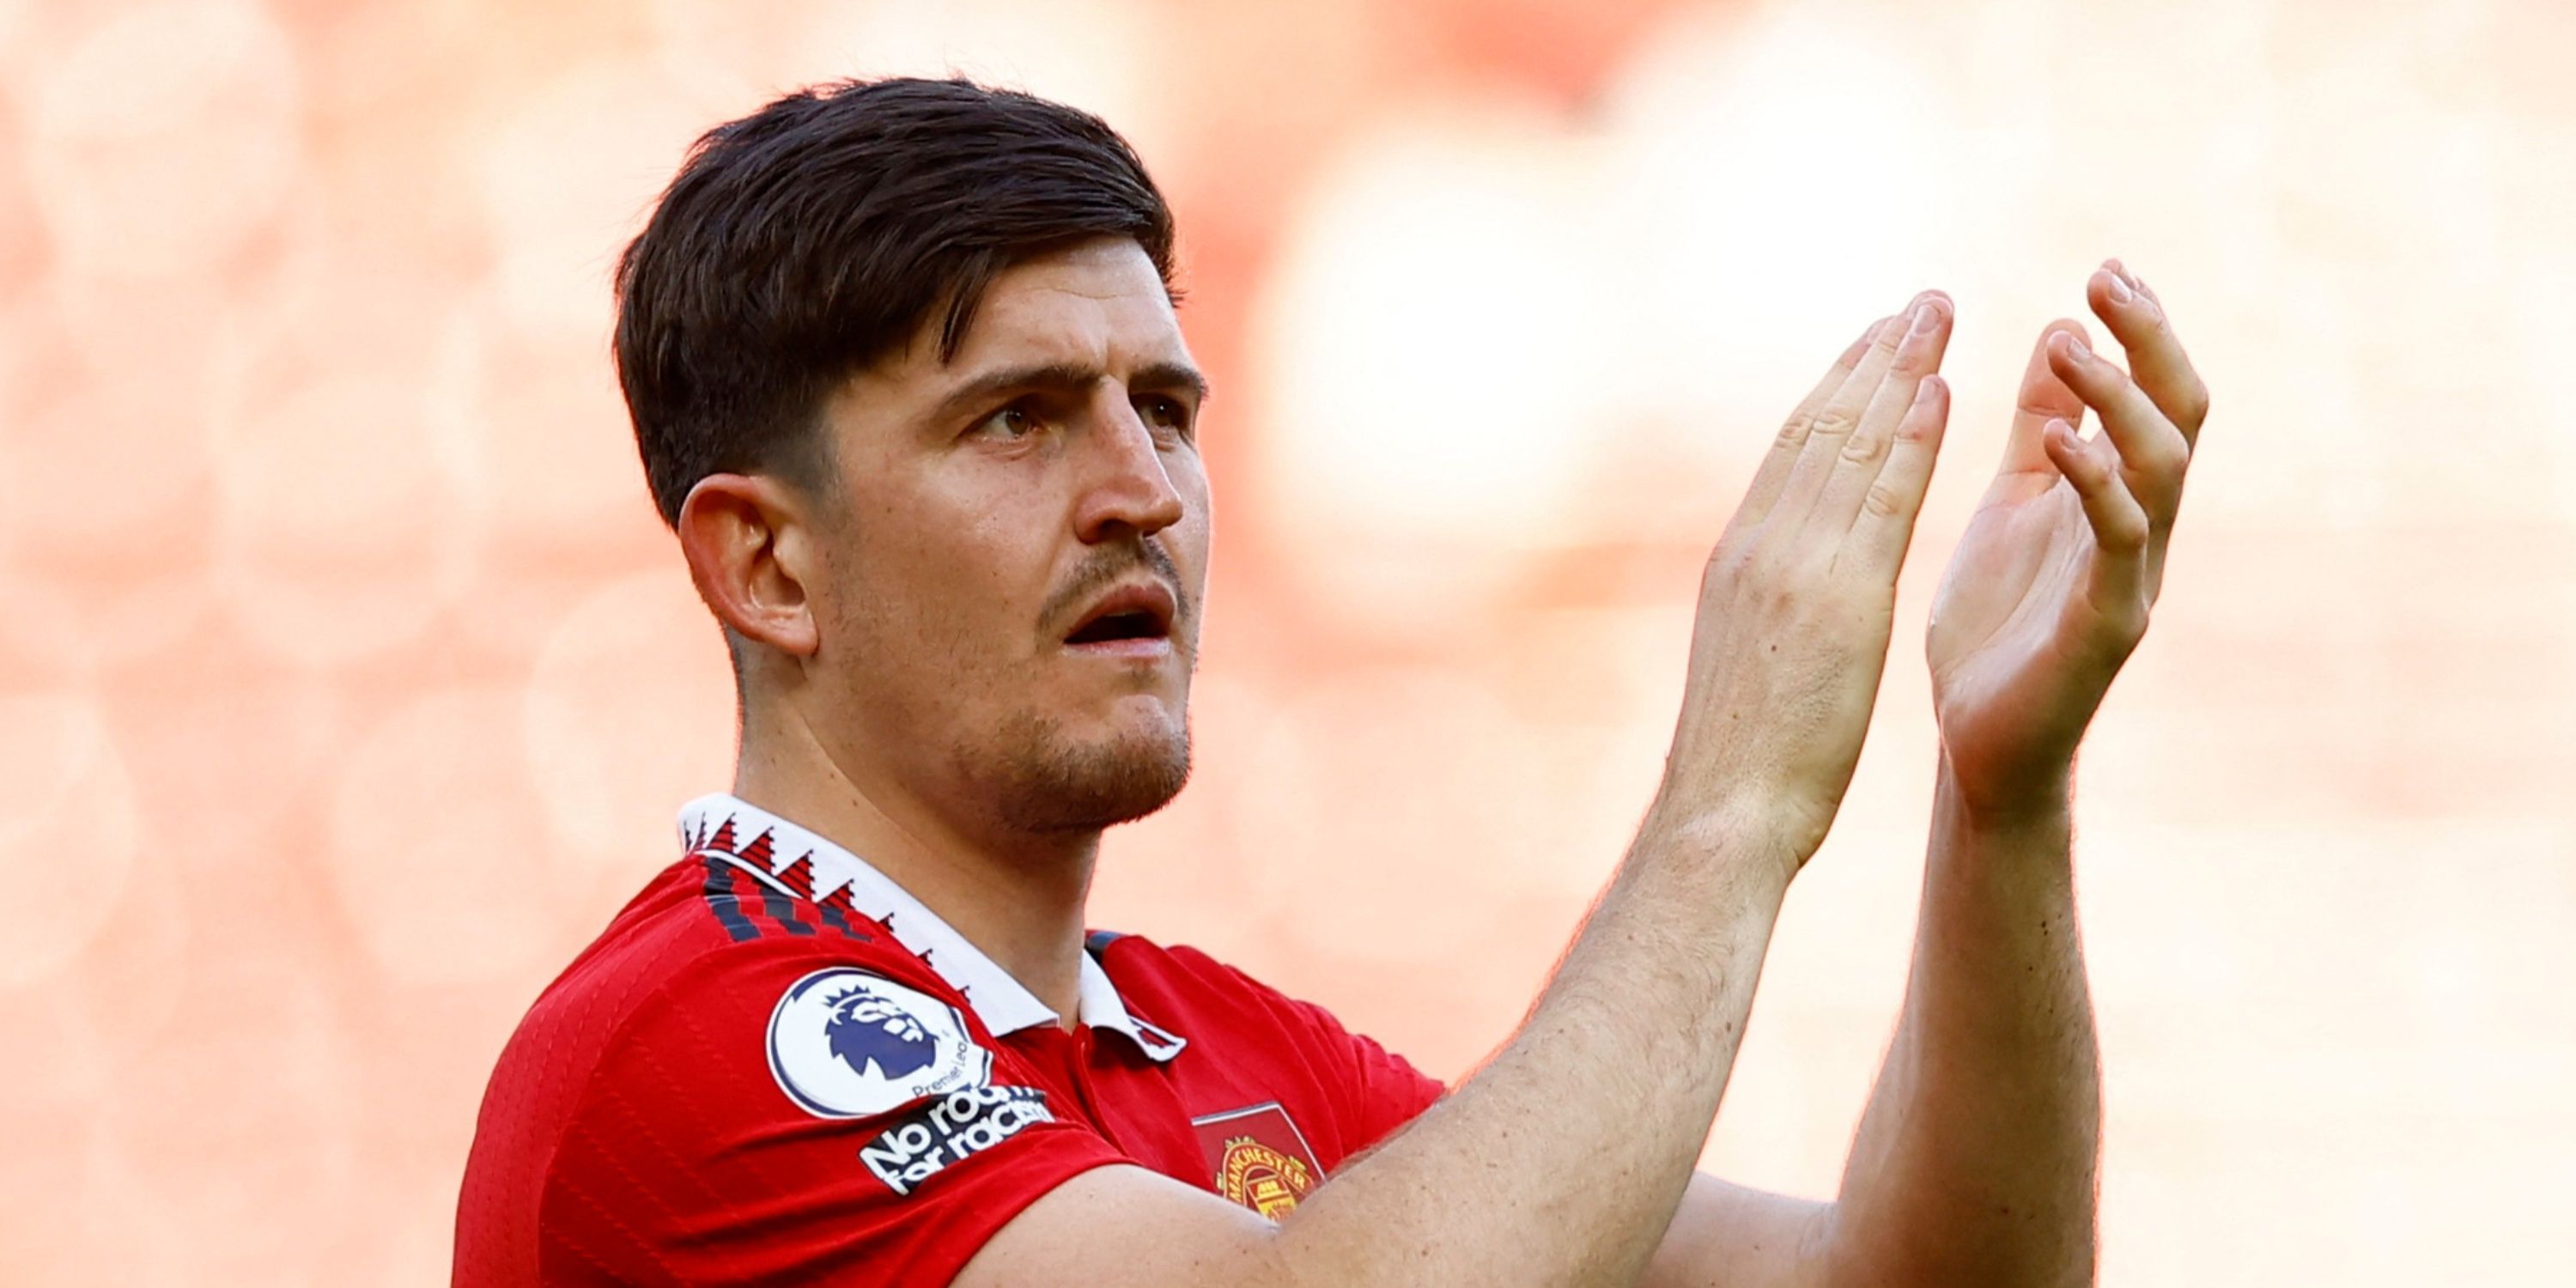 Spurs: Harry Maguire signing would please Kane